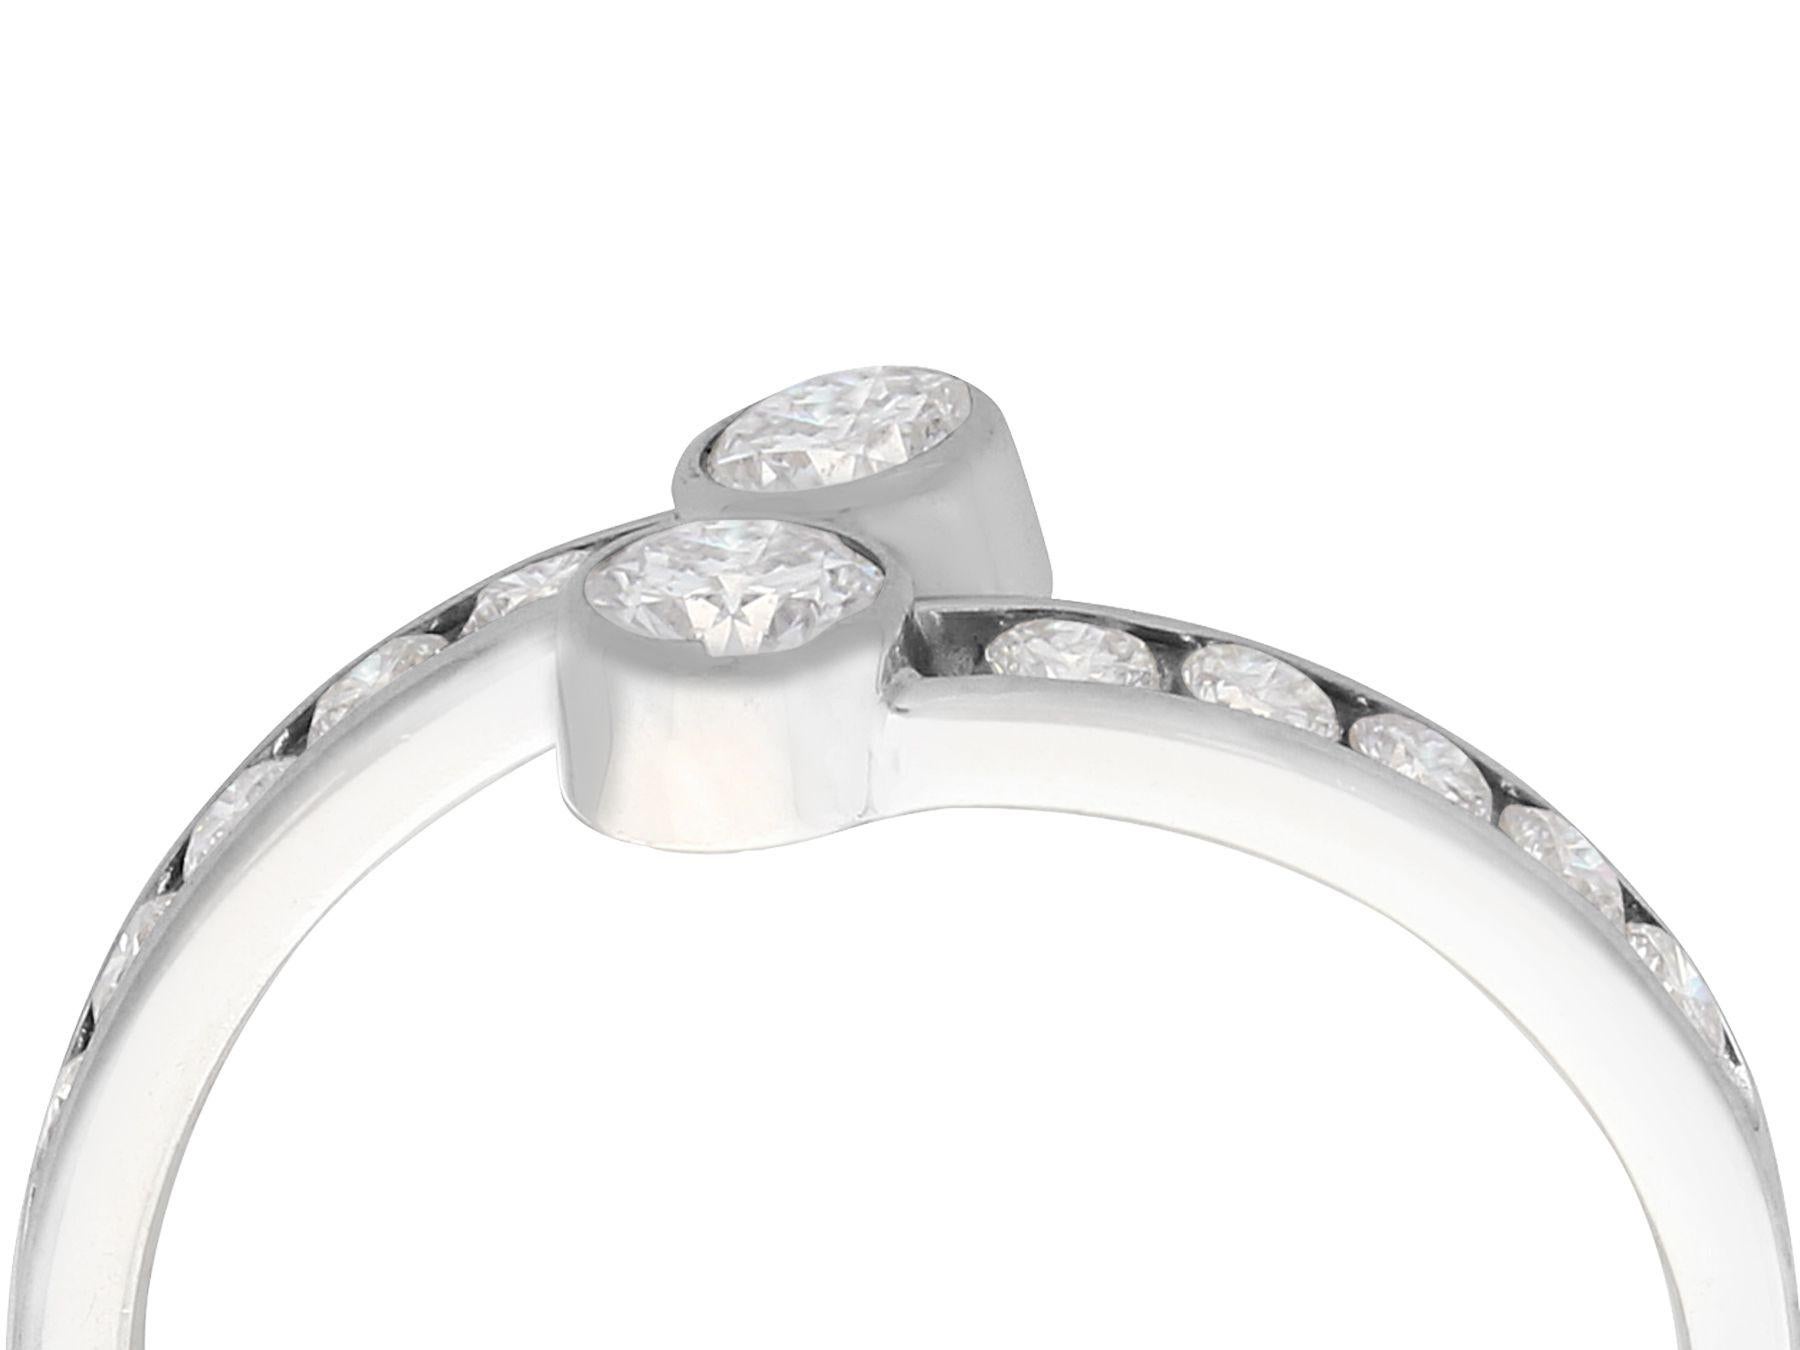 A fine 0.50 carat diamond and 14 karat white gold twist ring; part of our vintage jewelry and estate jewelry collections.

This fine vintage diamond ring has been crafted in 14k white gold.

The white gold twist ring features two bezel set 0.15Ct